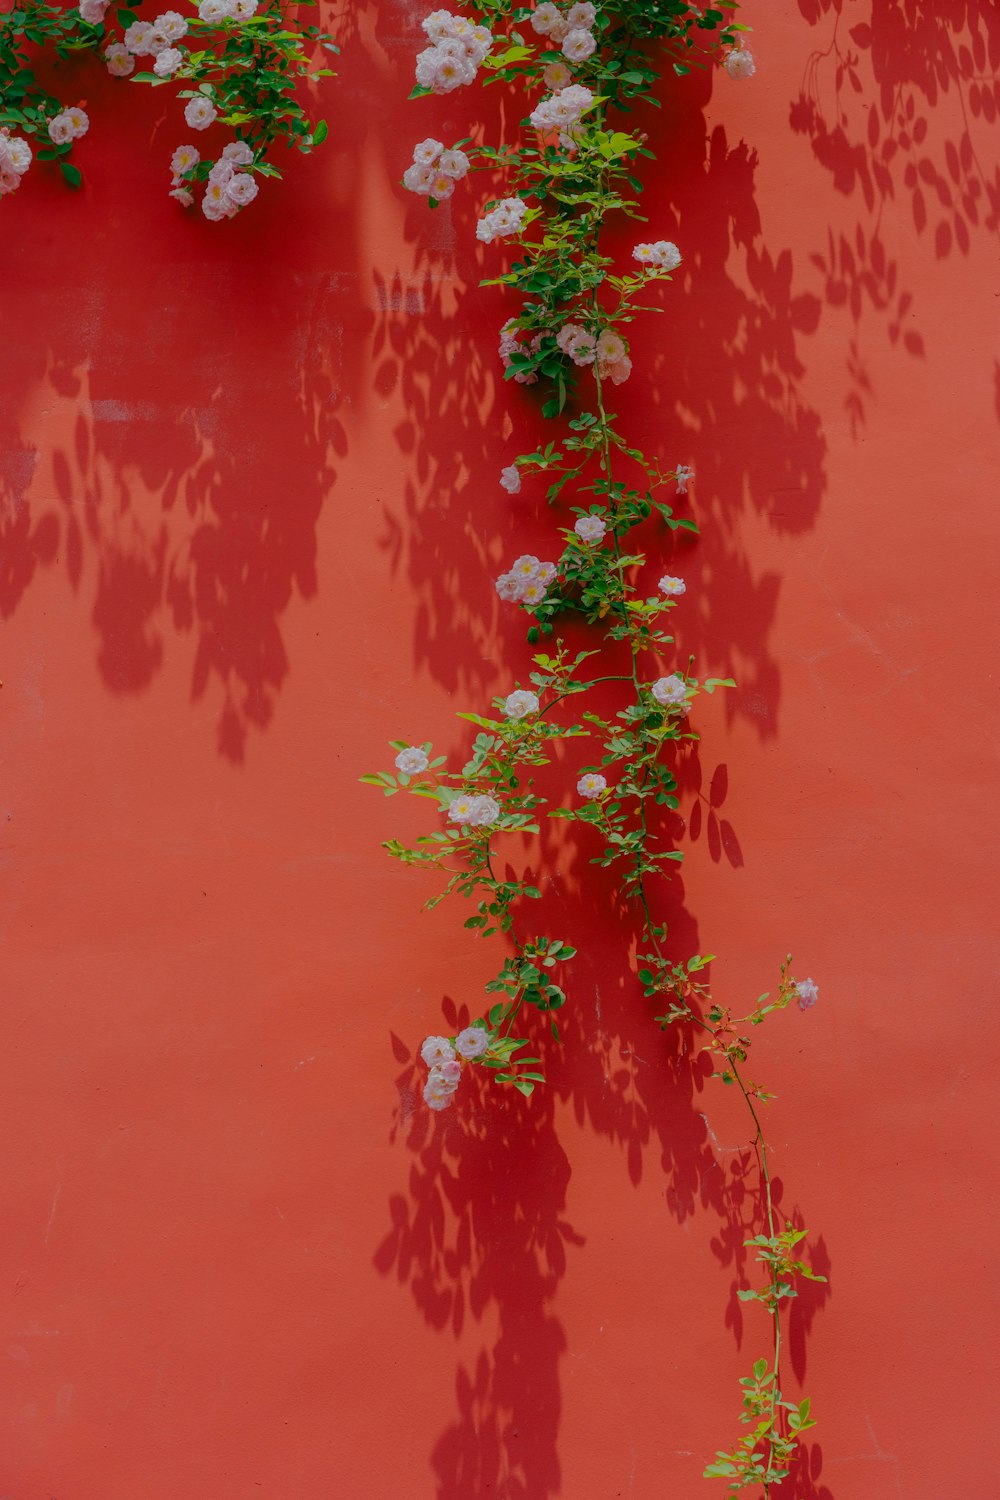 a red wall with white flowers growing on it